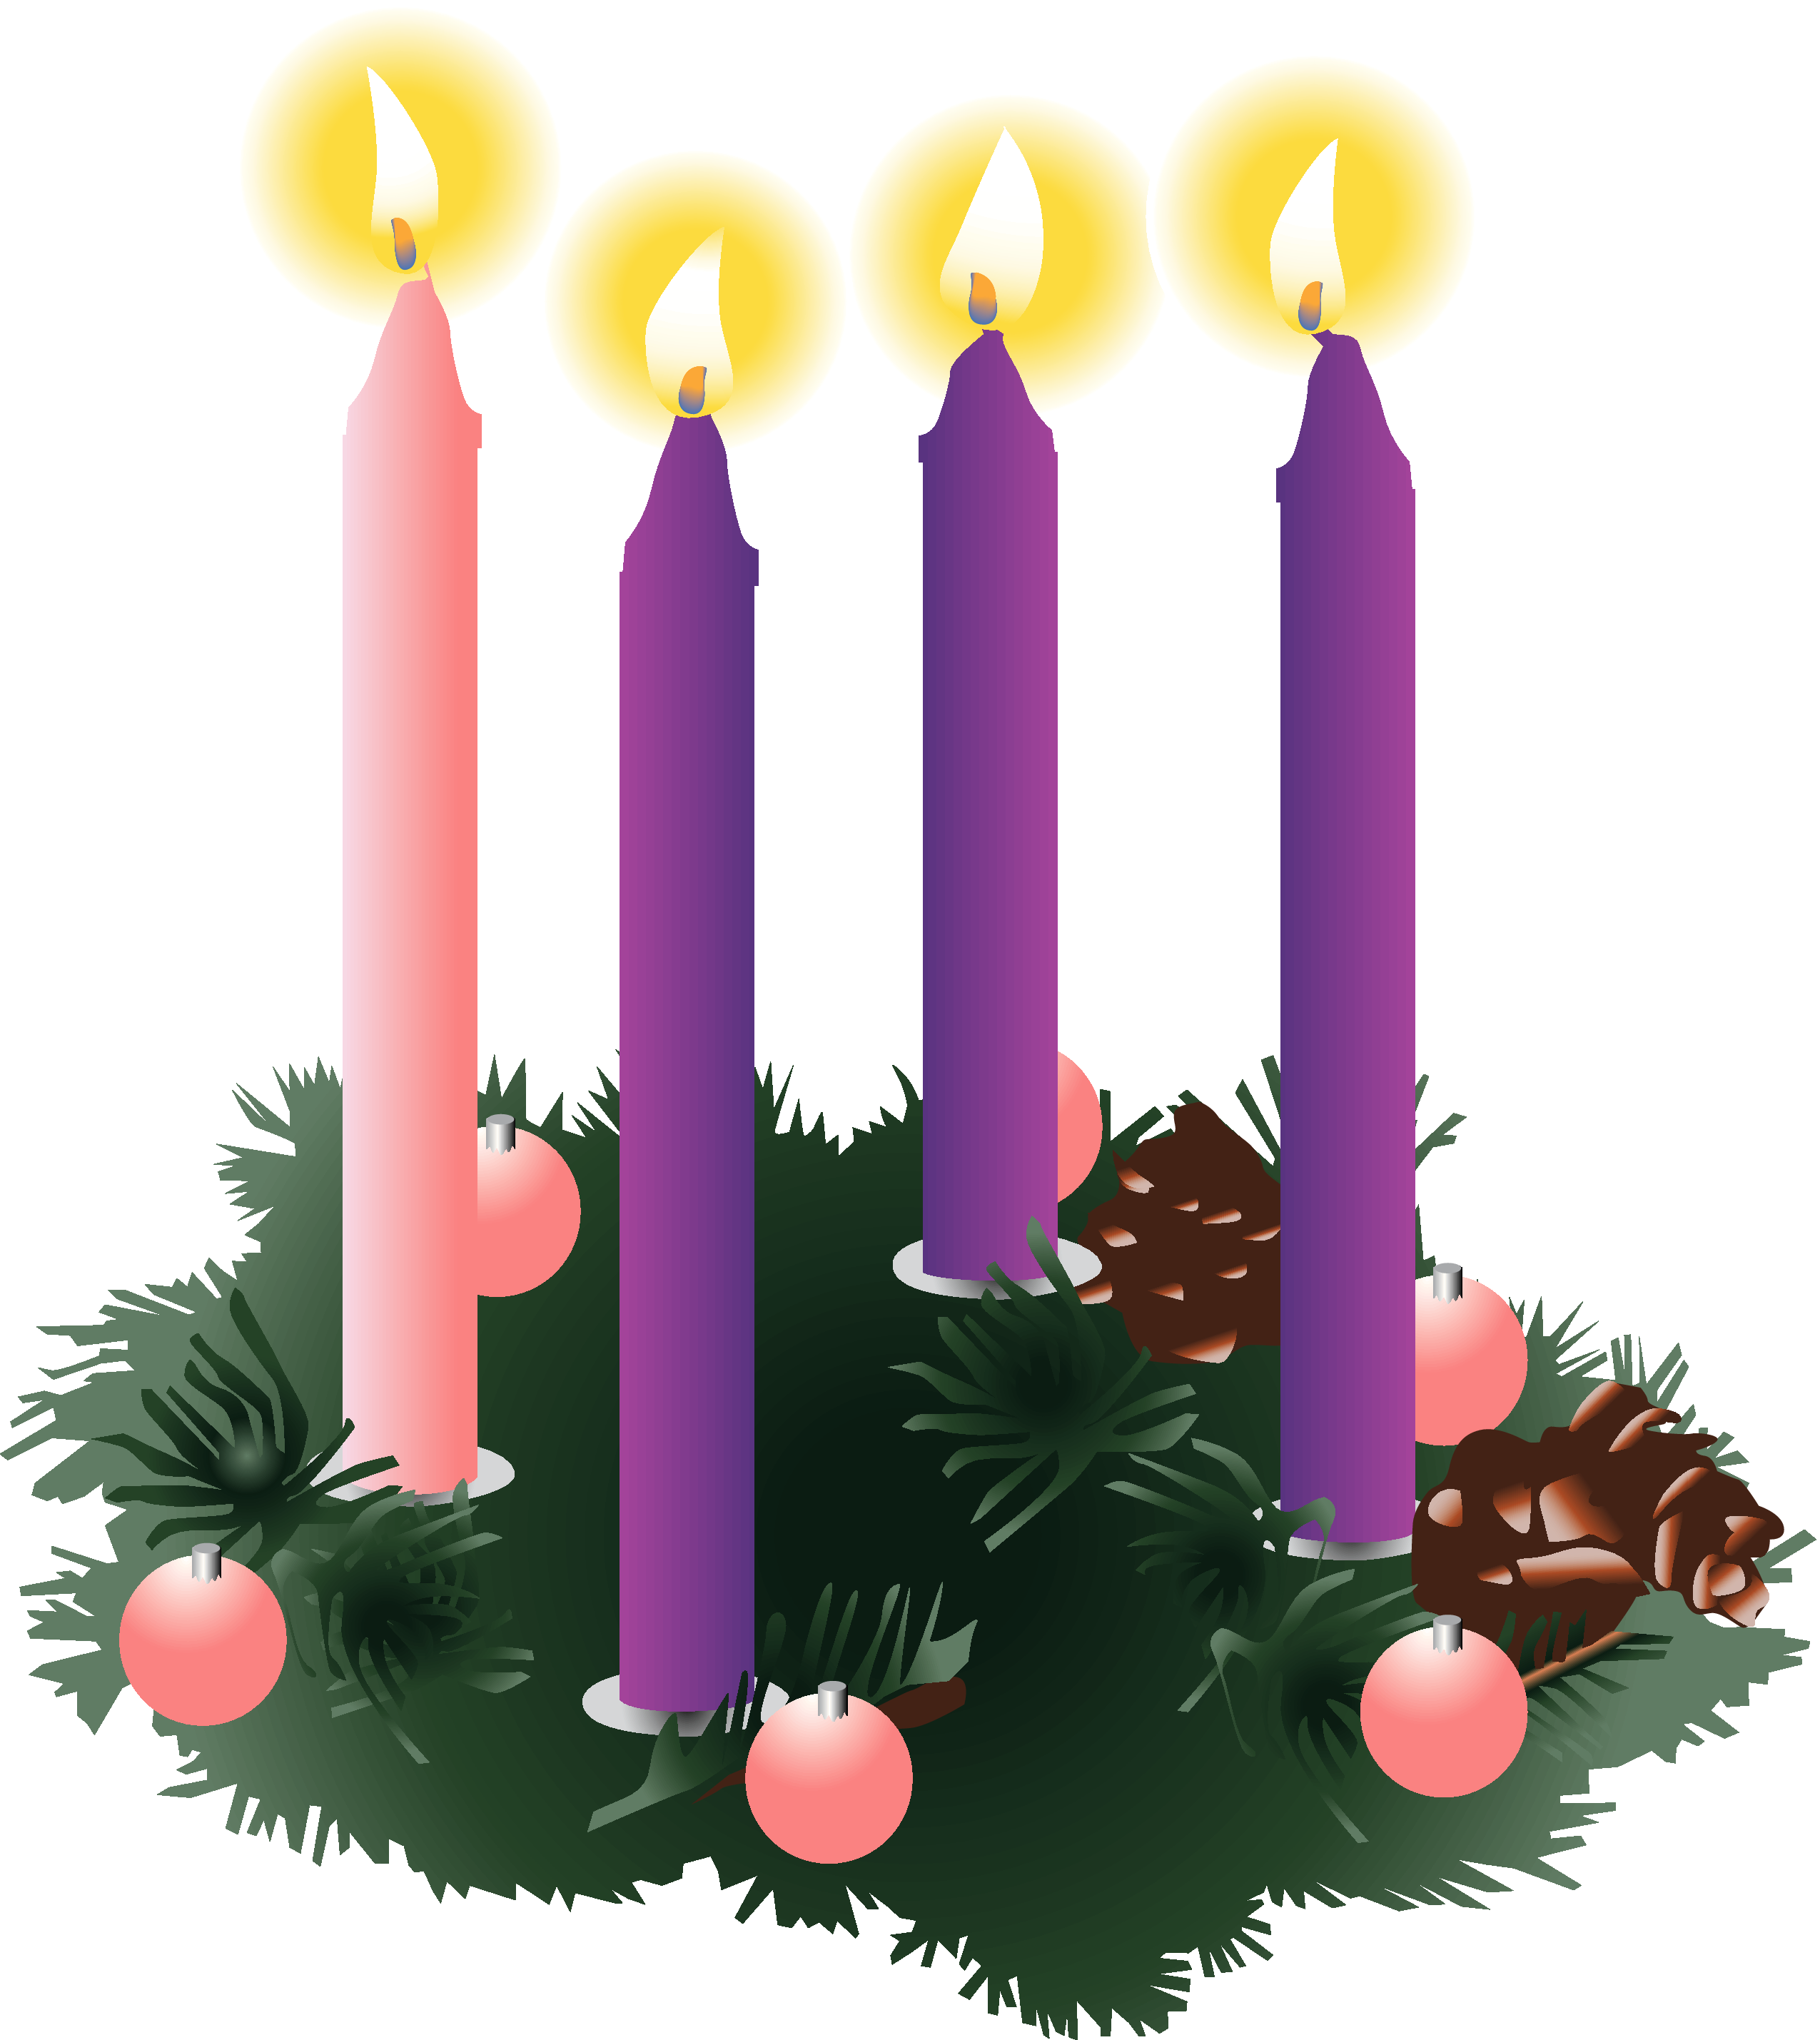 Clipart candle church candle. Advent candles christian cliparts